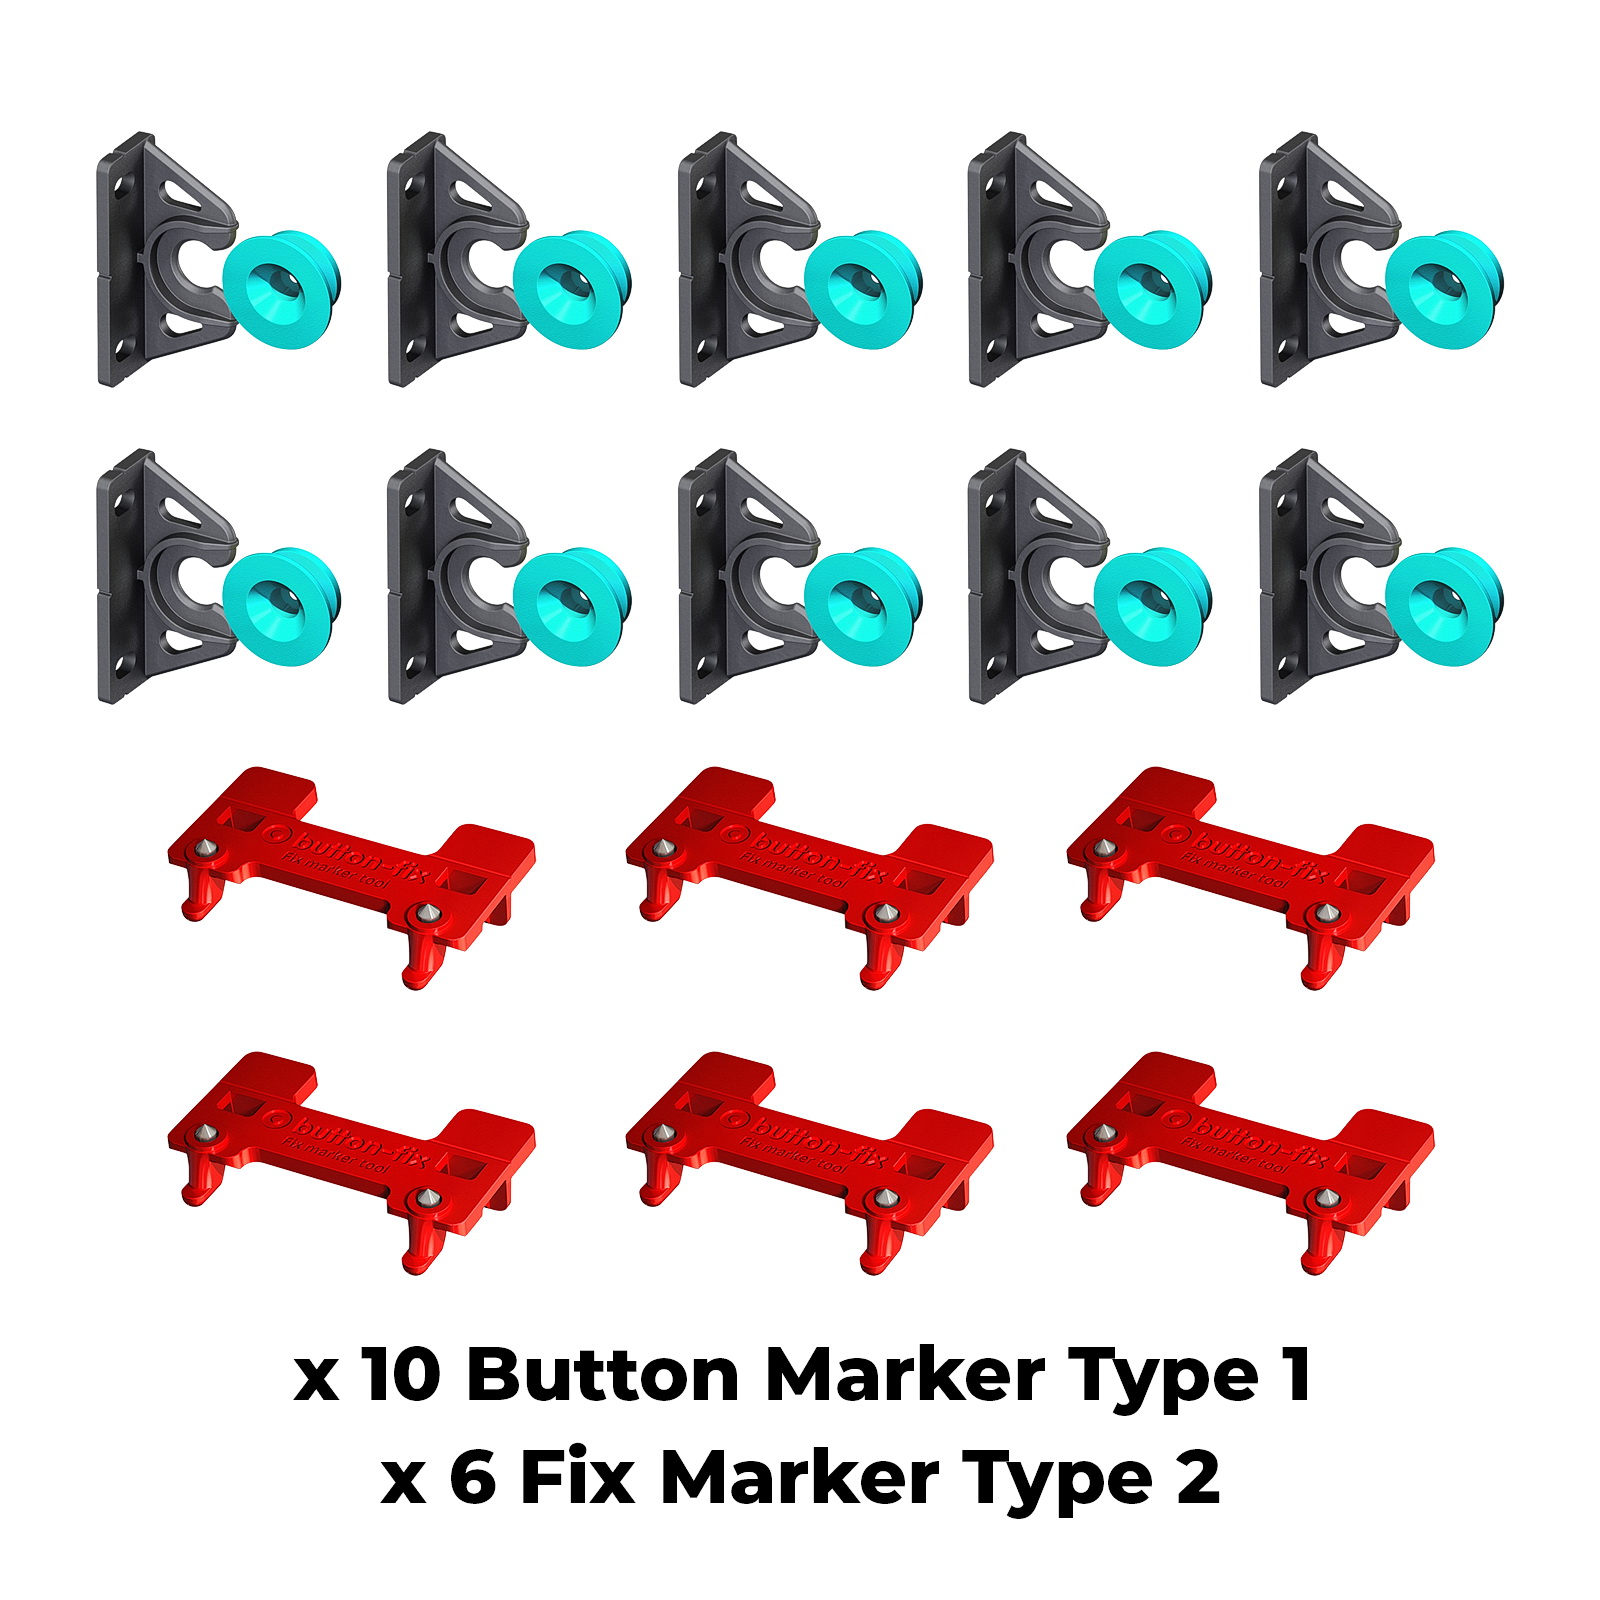 Button Fix Type 2 Bracket with New Upgraded Button x10 + 6 Marker Tools